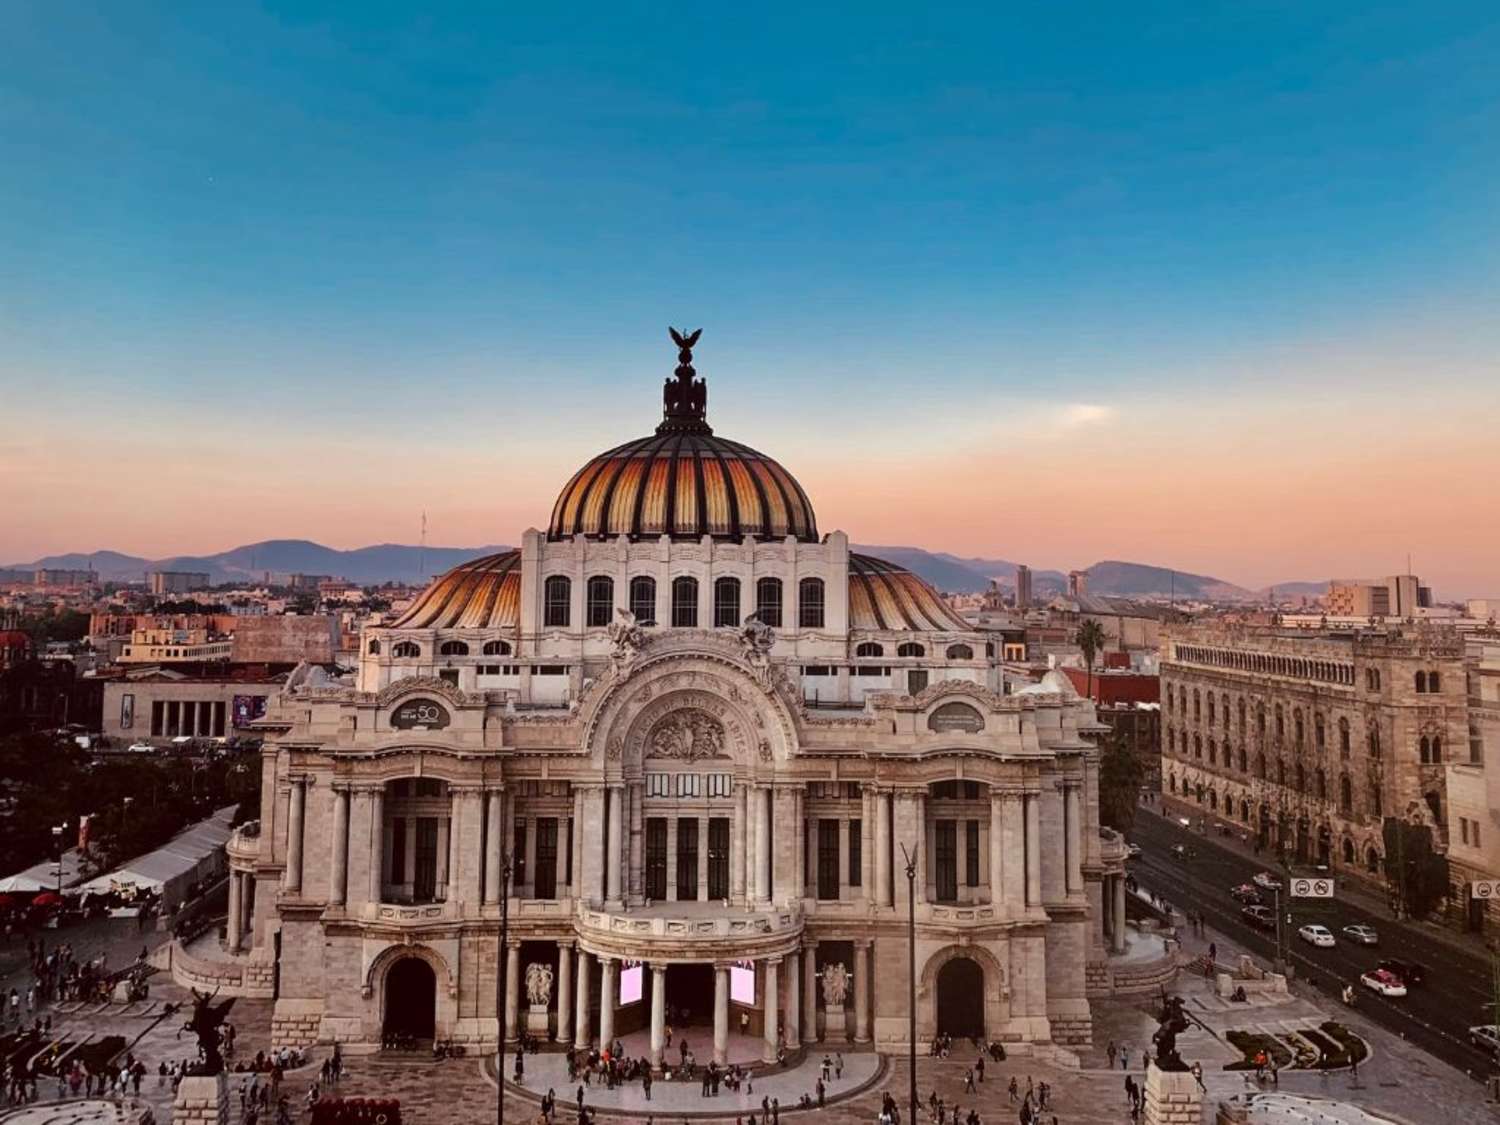 panoramic view of central Mexico City